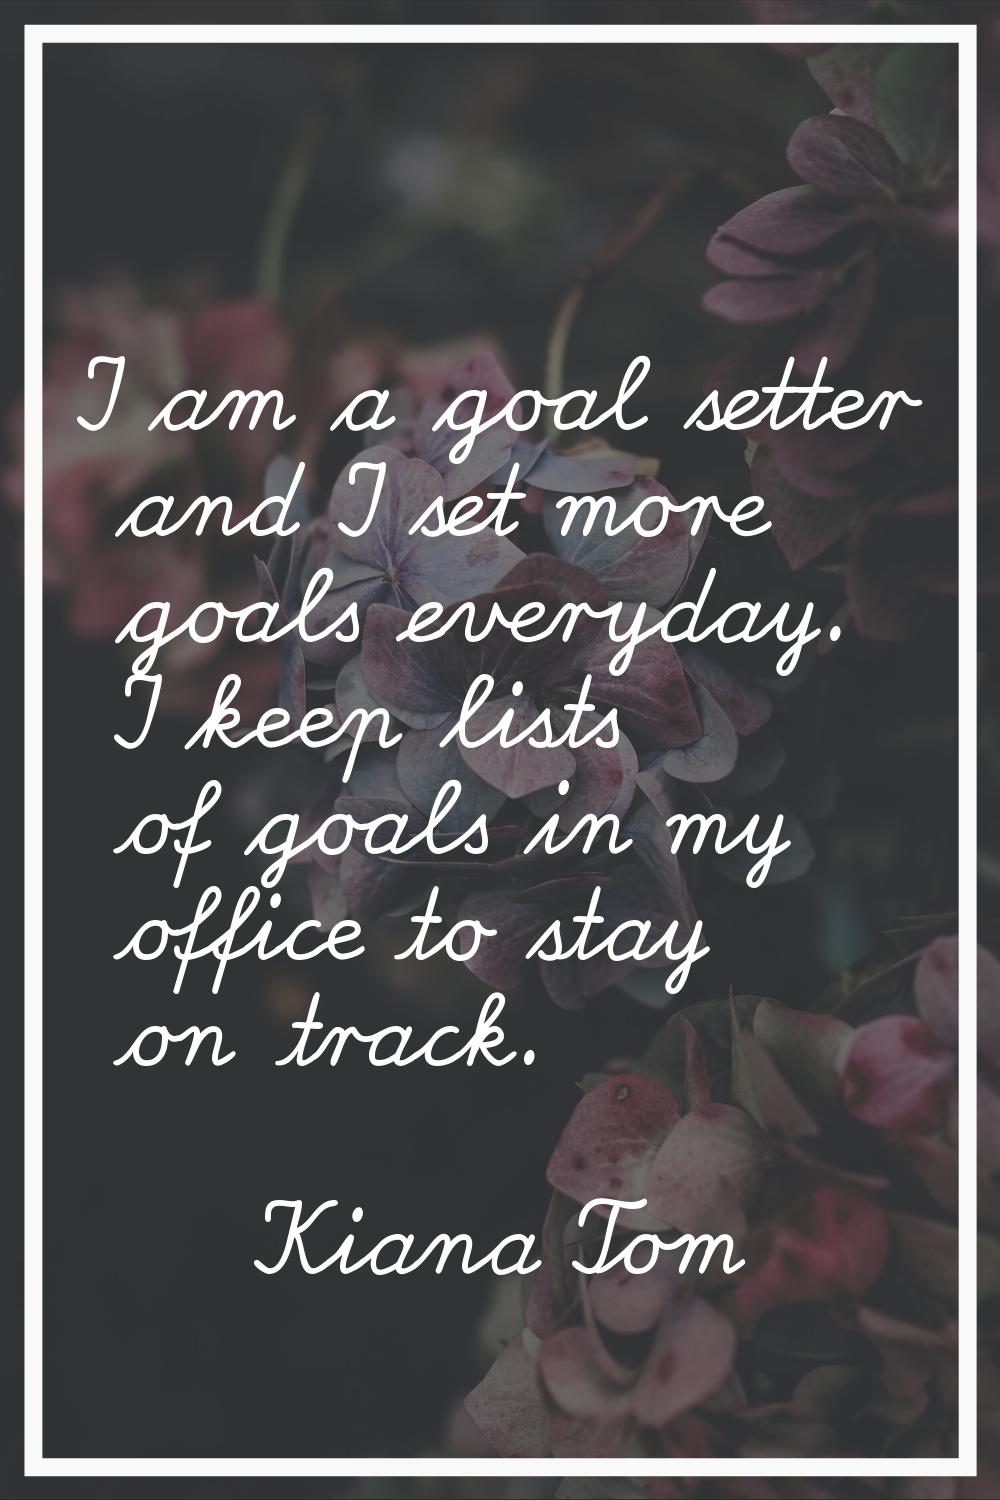 I am a goal setter and I set more goals everyday. I keep lists of goals in my office to stay on tra